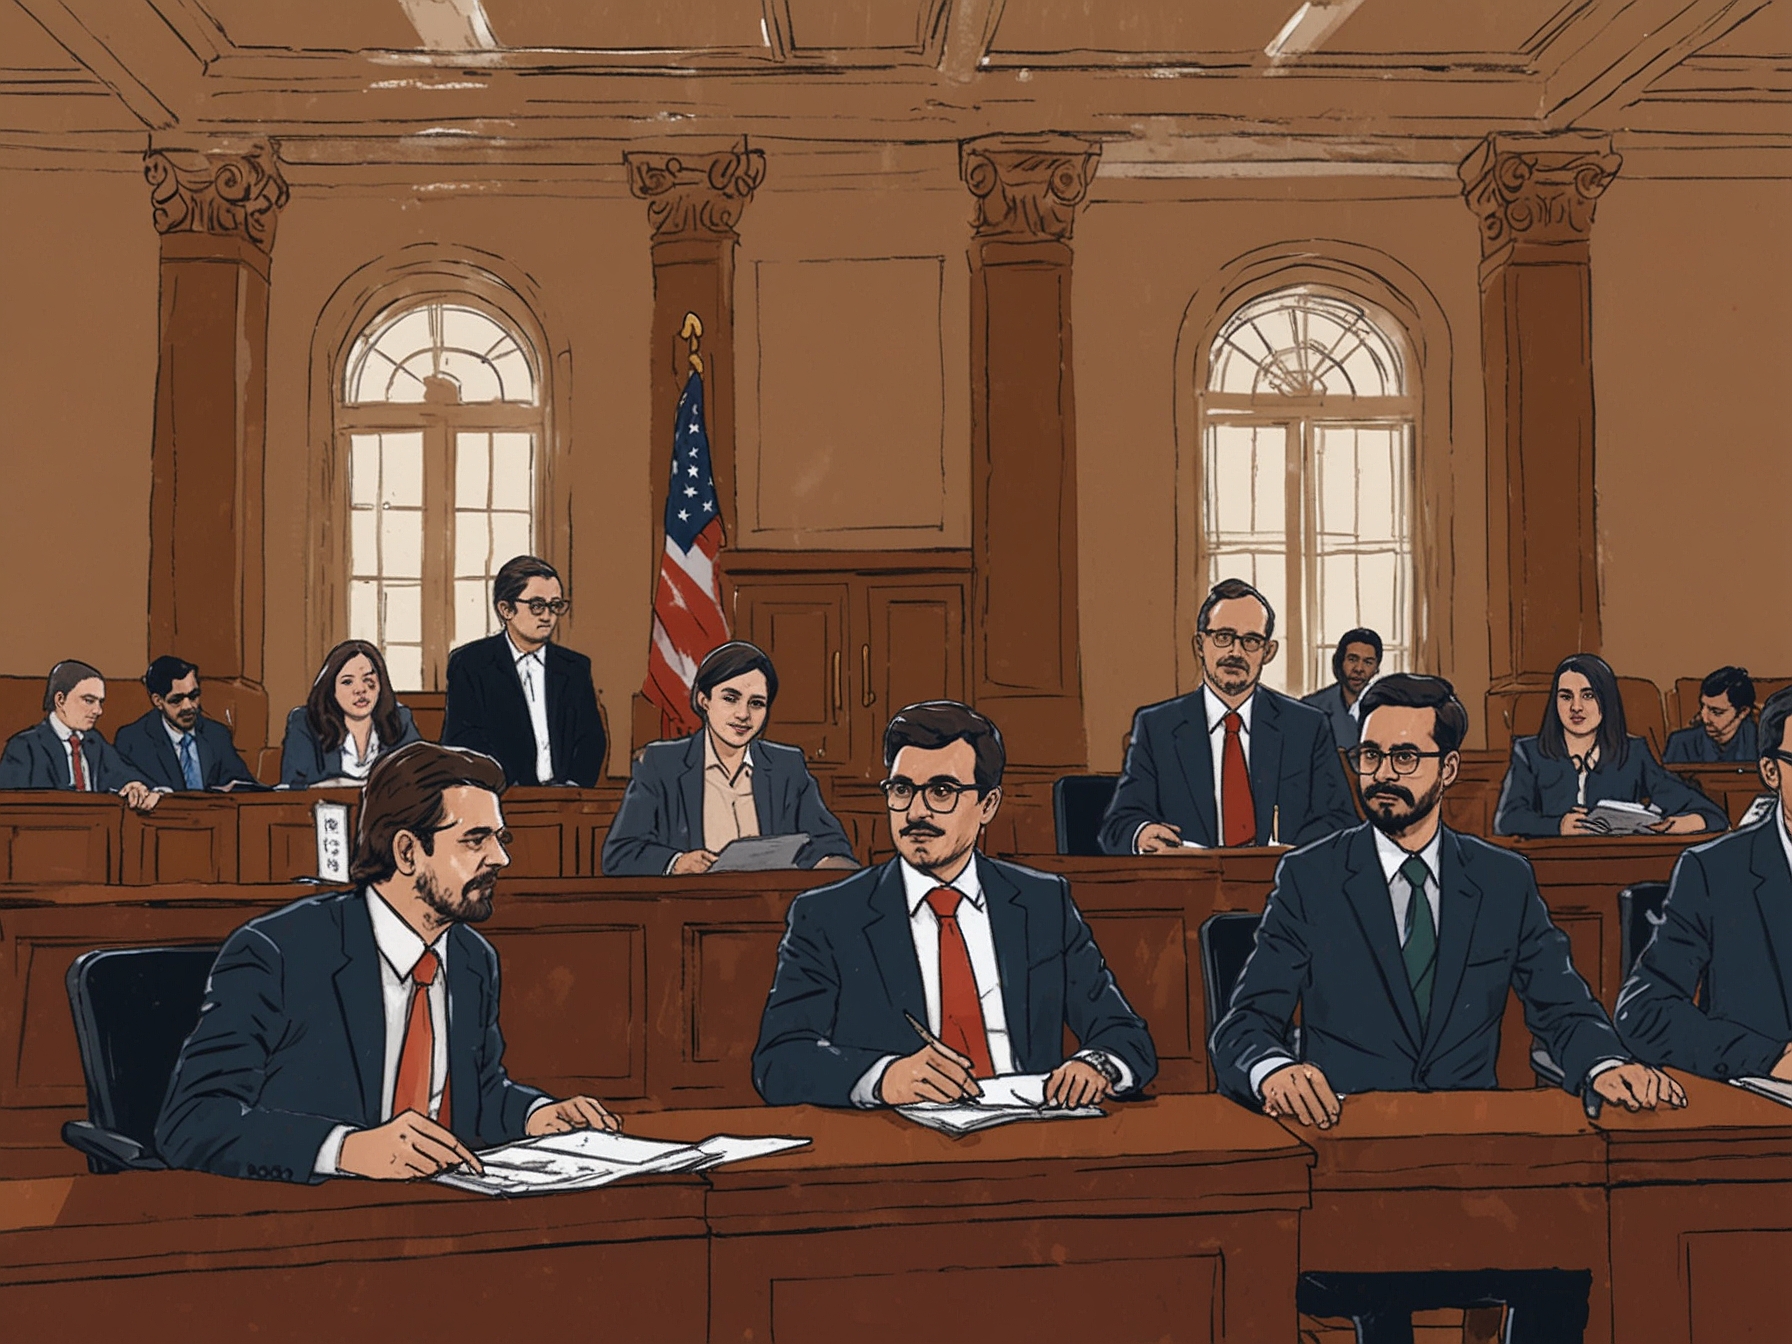 A courtroom illustration featuring Zomato's legal team, representing the company's efforts to appeal the GST notice and navigate the complex tax regulations.